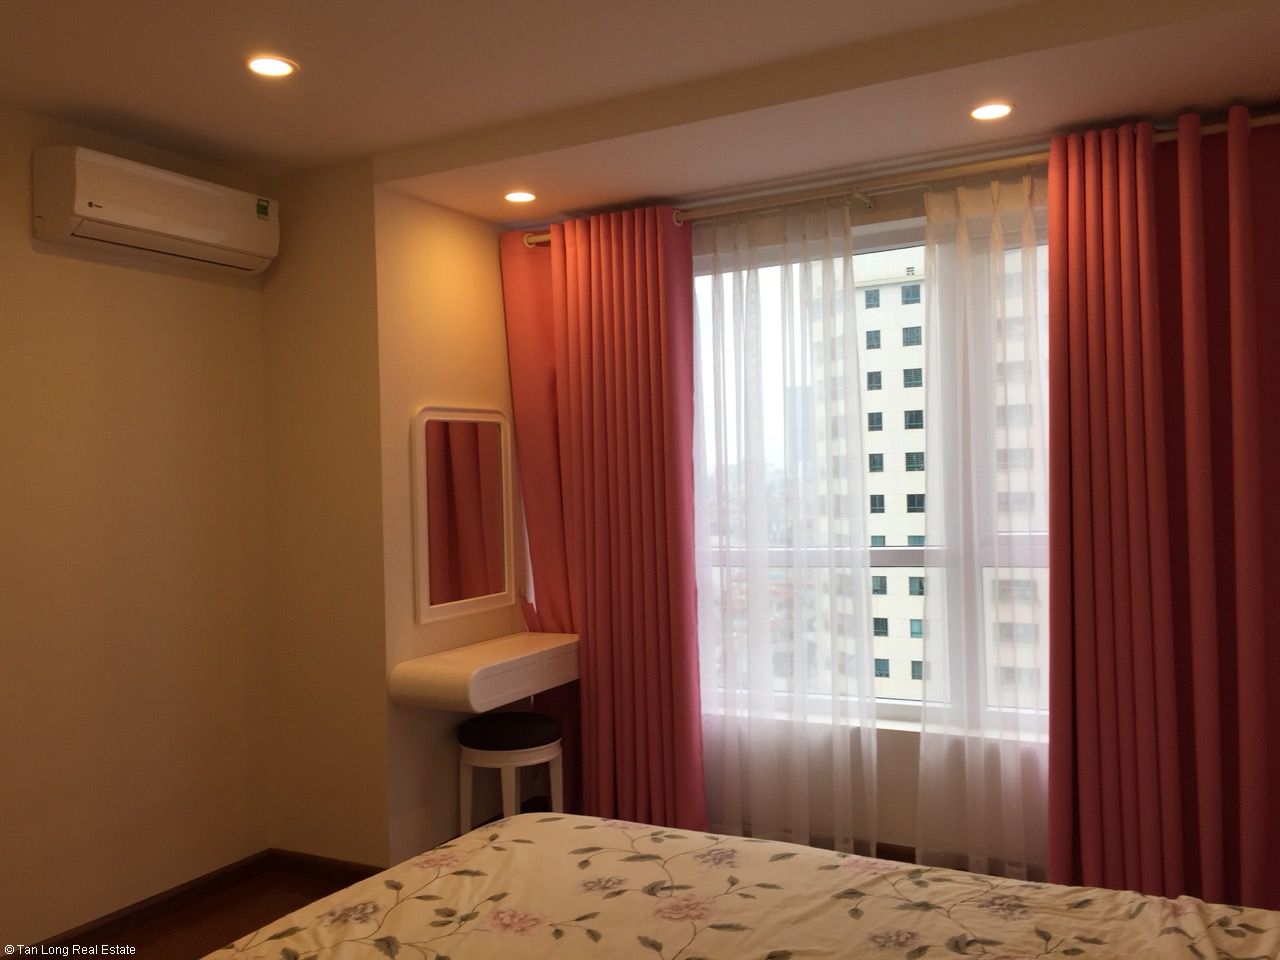 Brand new 3 bedroom furnished apartment in N04 building for rent on Hoang Dao Thuy street, Trung Hoa Nhan Chinh, Cau Giay 8